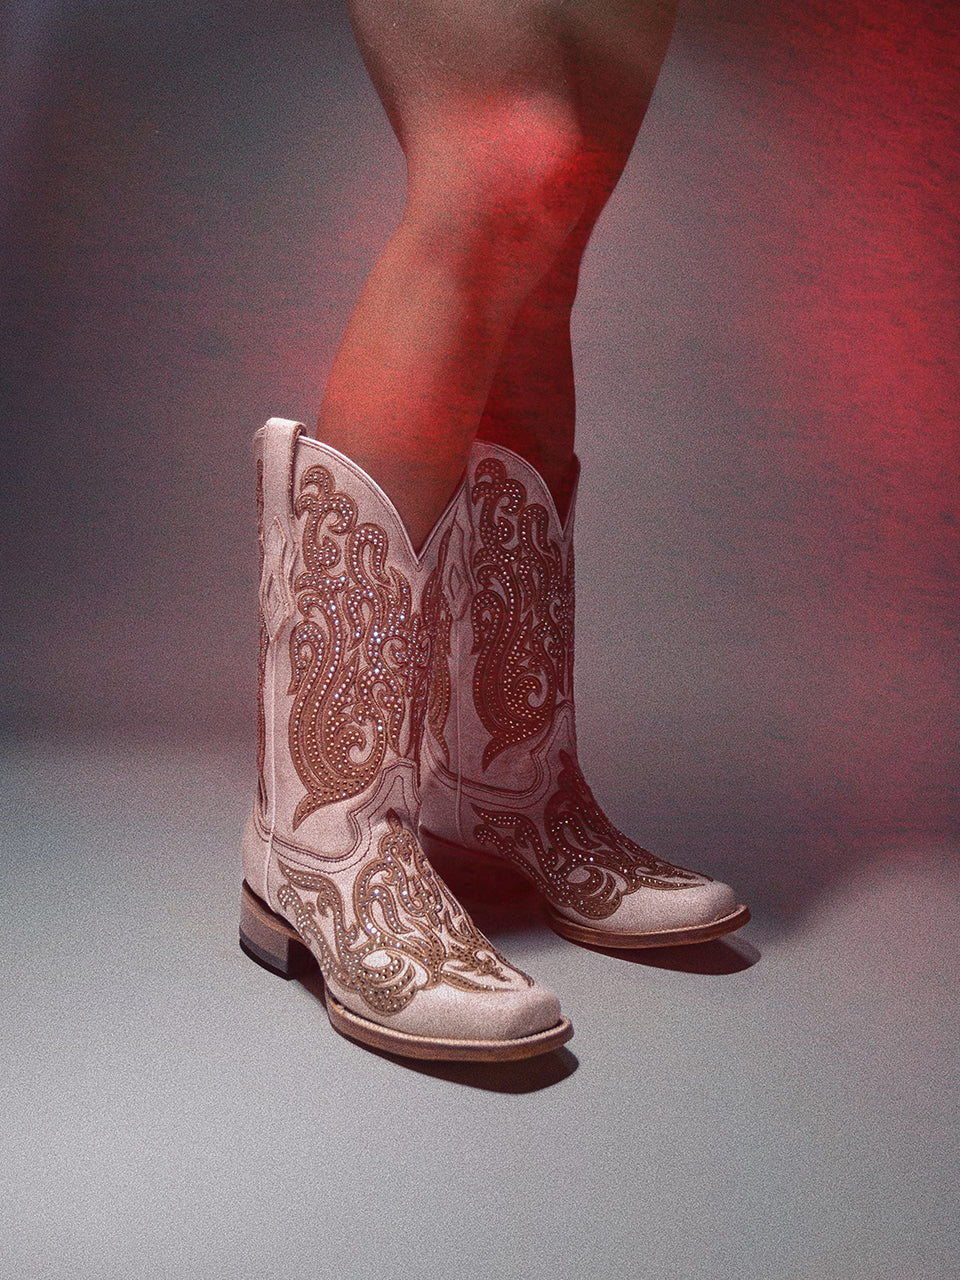 C4094 - WOMEN'S DISTRESSED WHITE WITH HONEY EMBROIDERY AND CRYSTALS SQUARE TOE COWBOY BOOT